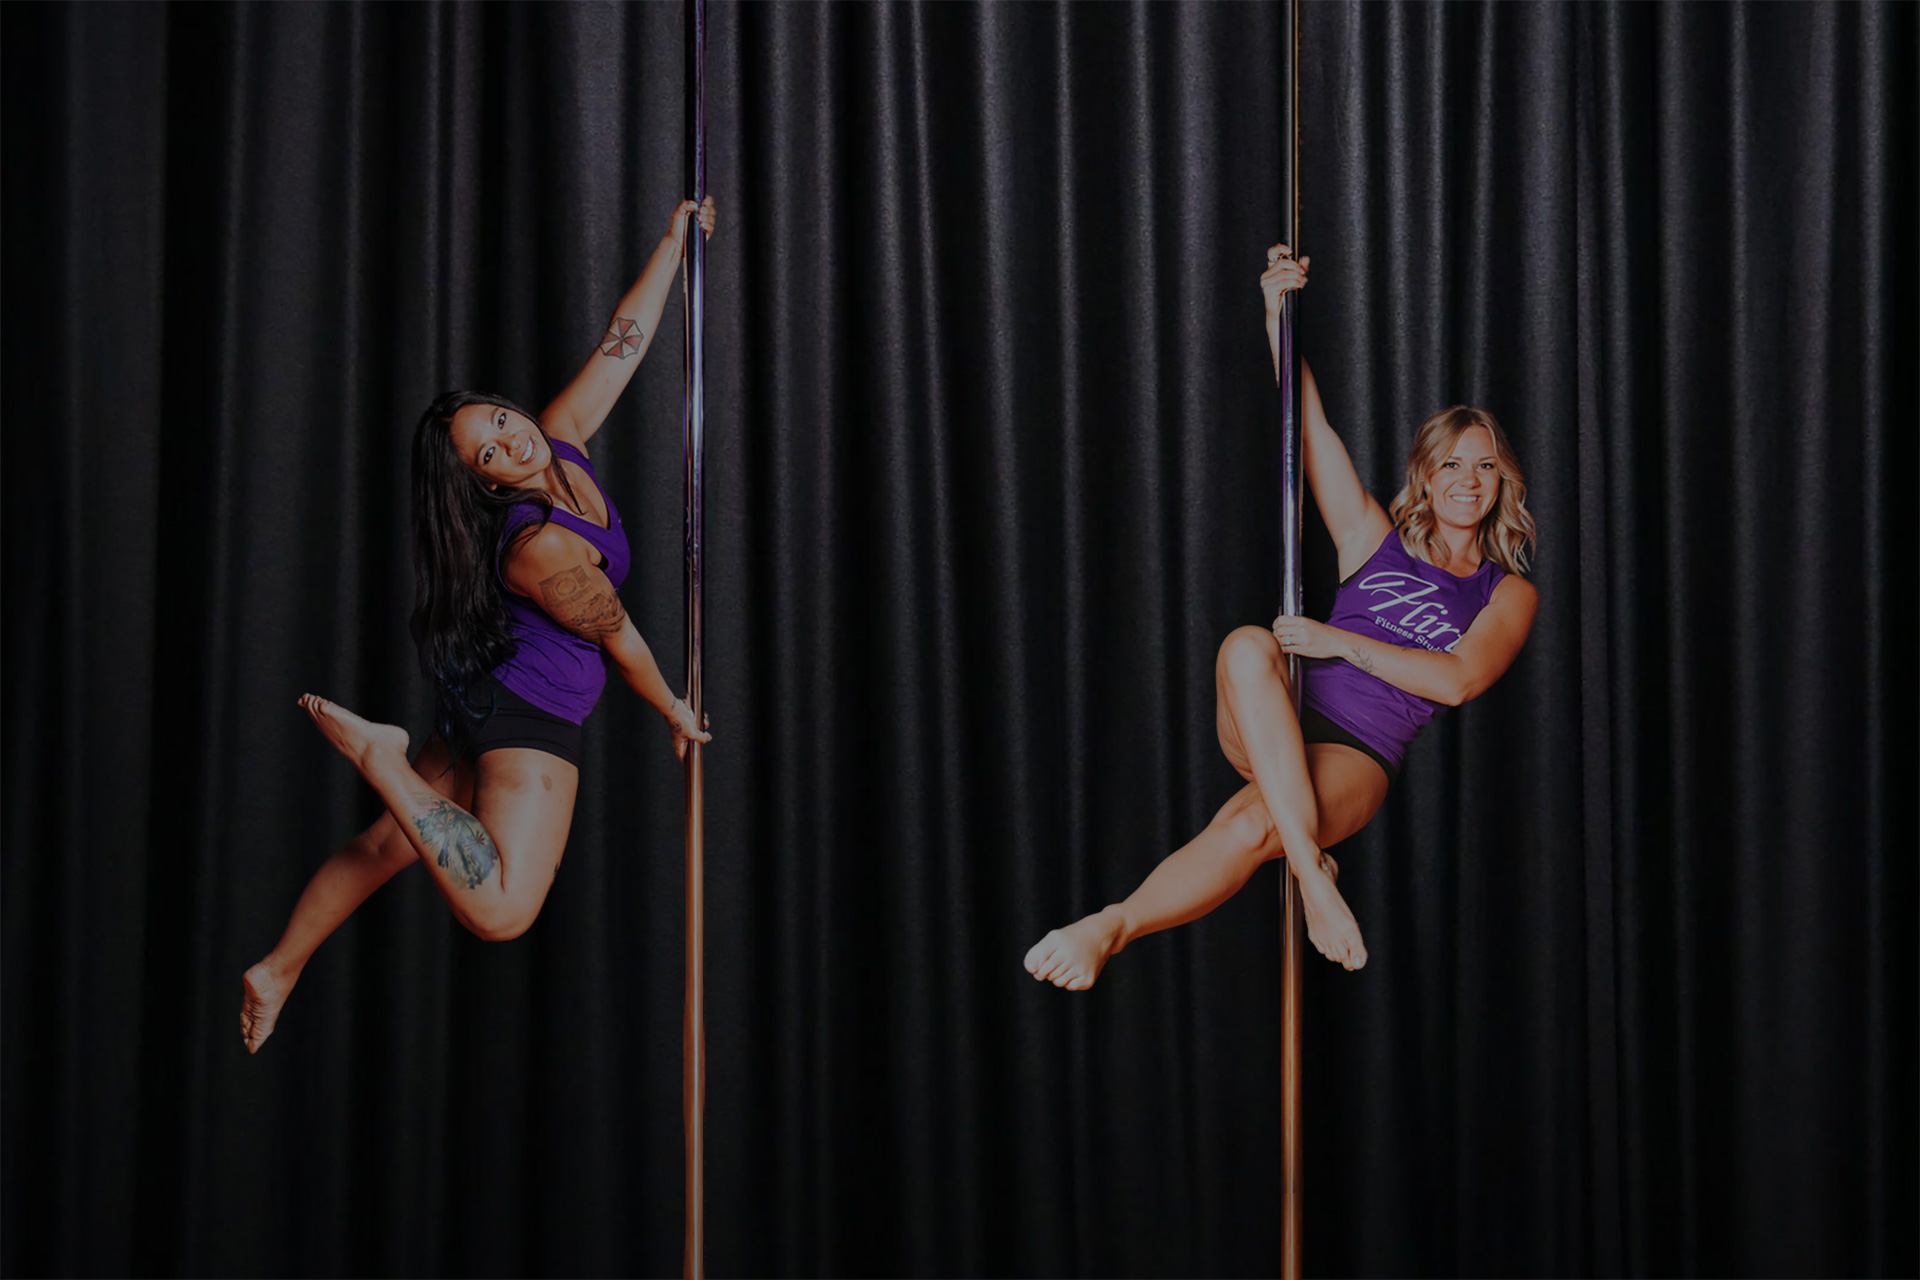 Vertical Vixens Pole Fitness - Pole Dancing and Dance Fitness Classes